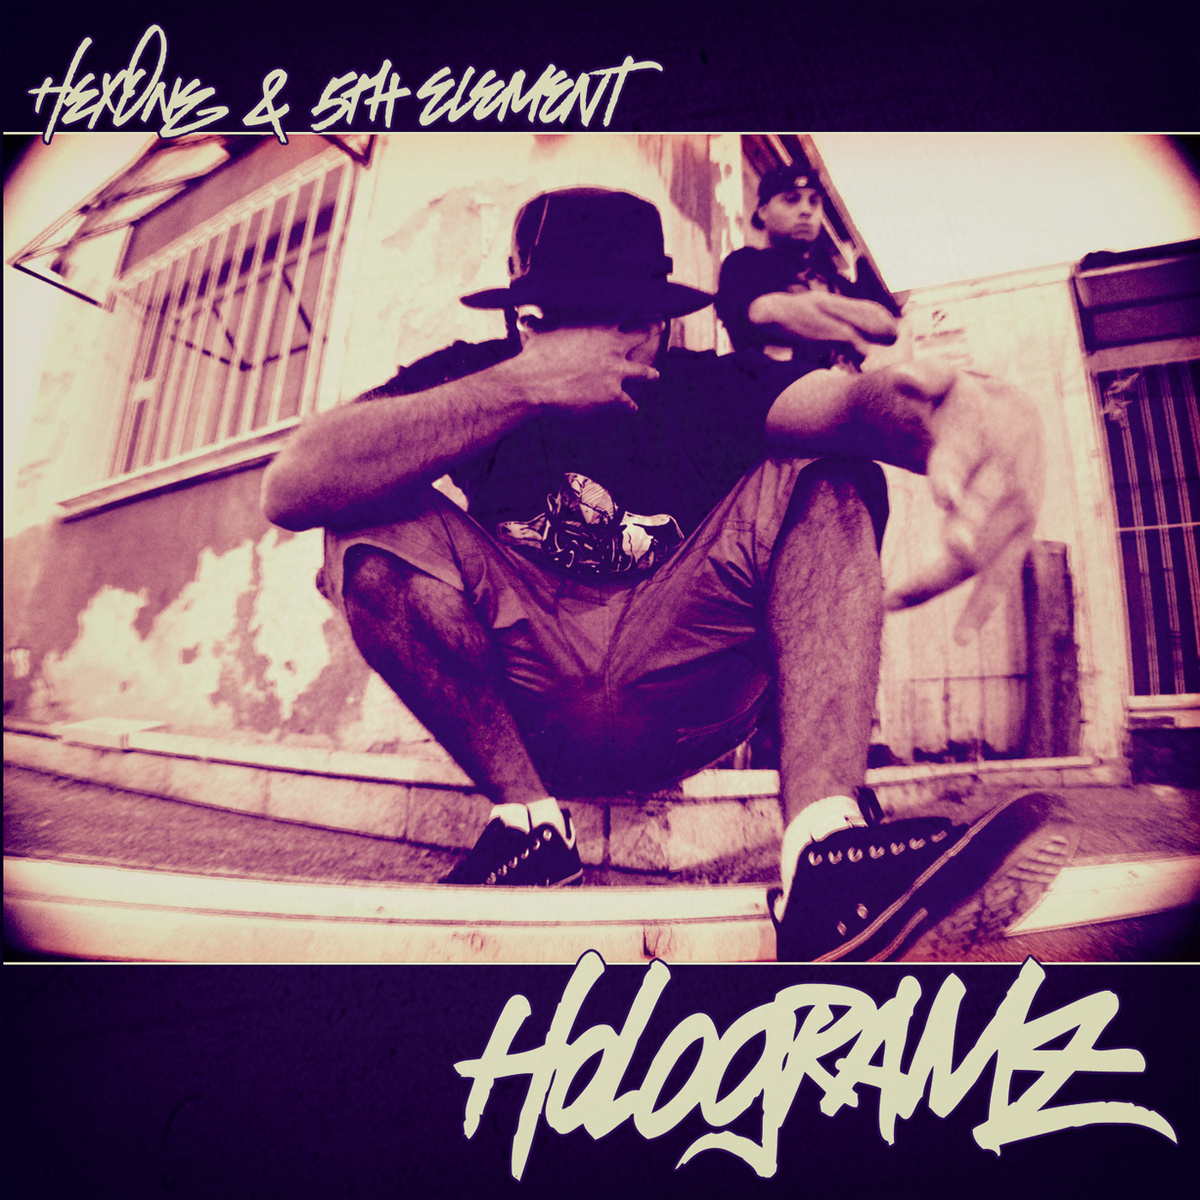 Hex_one___5th_element_-_hologramz